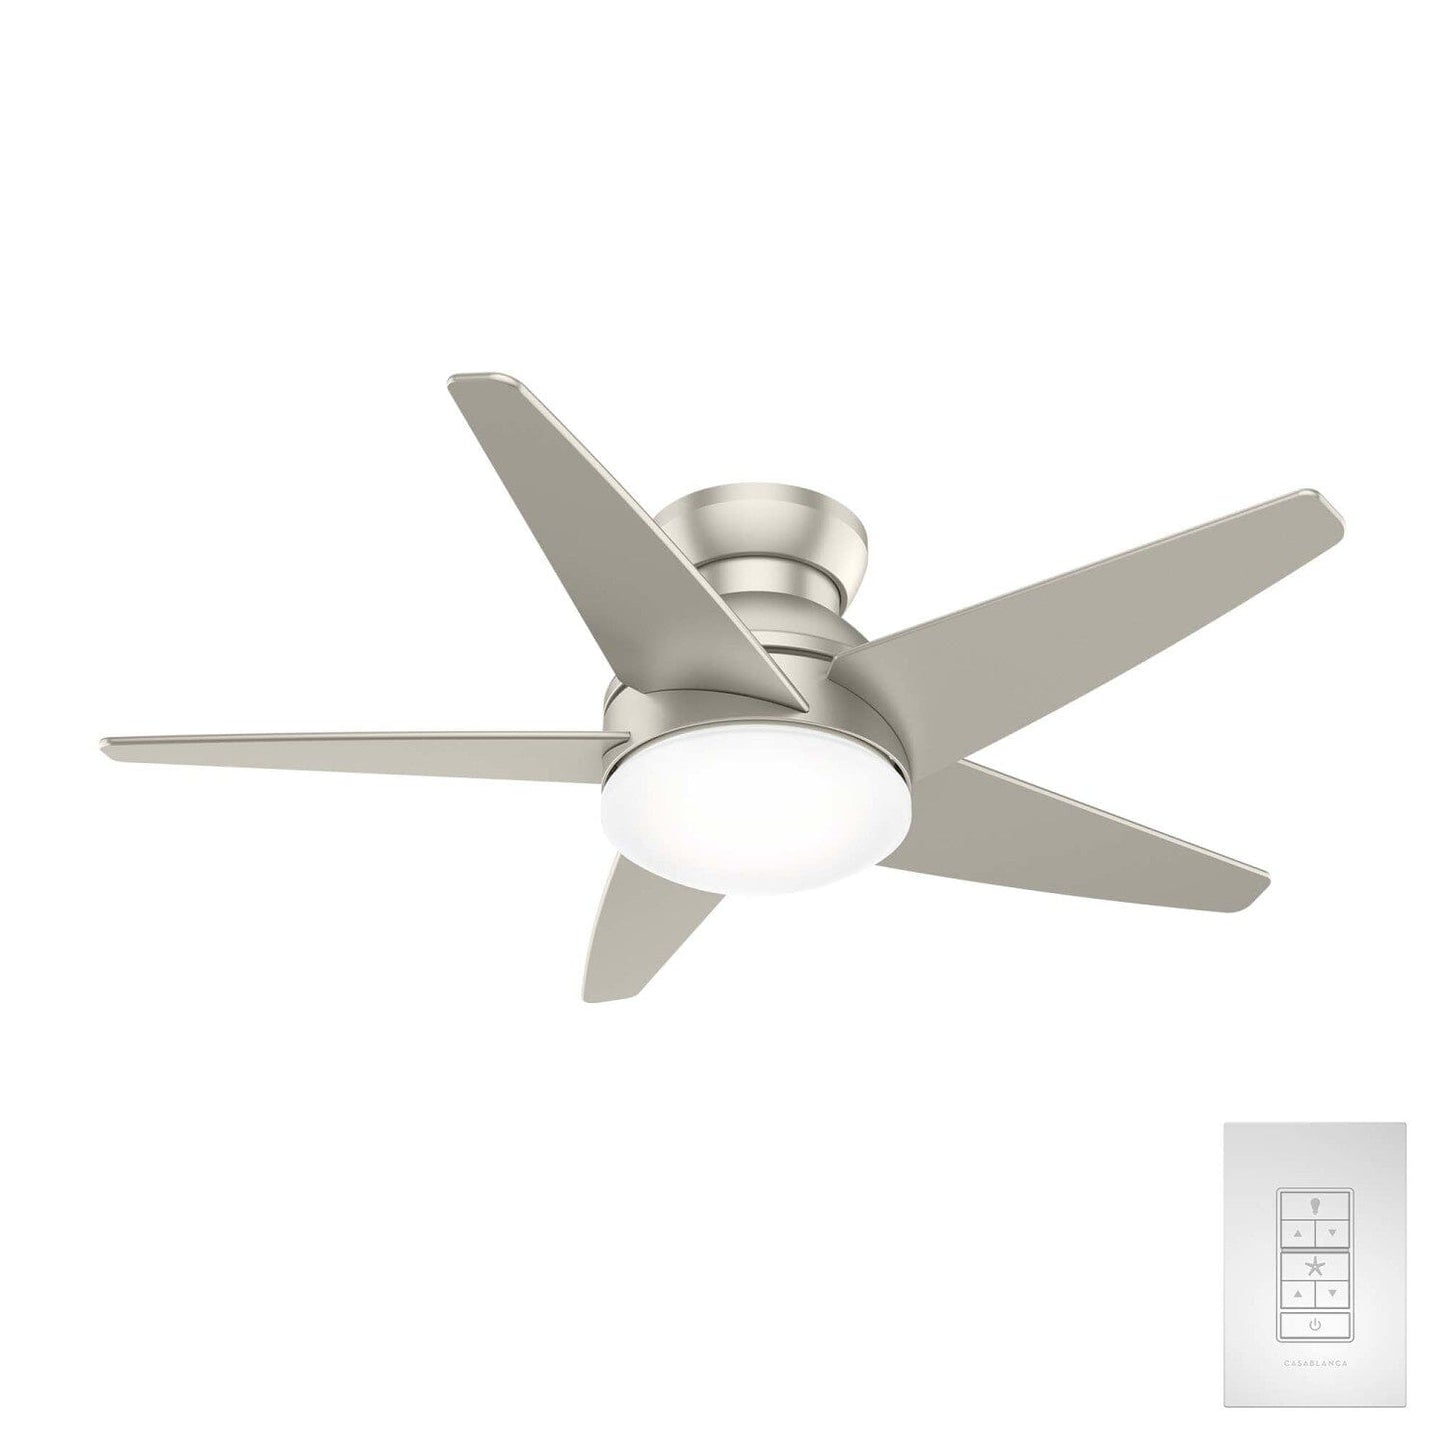 Isotope Low Profile with LED Light 44 inch Ceiling Fans Casablanca Matte Nickel - Matte Nickel 